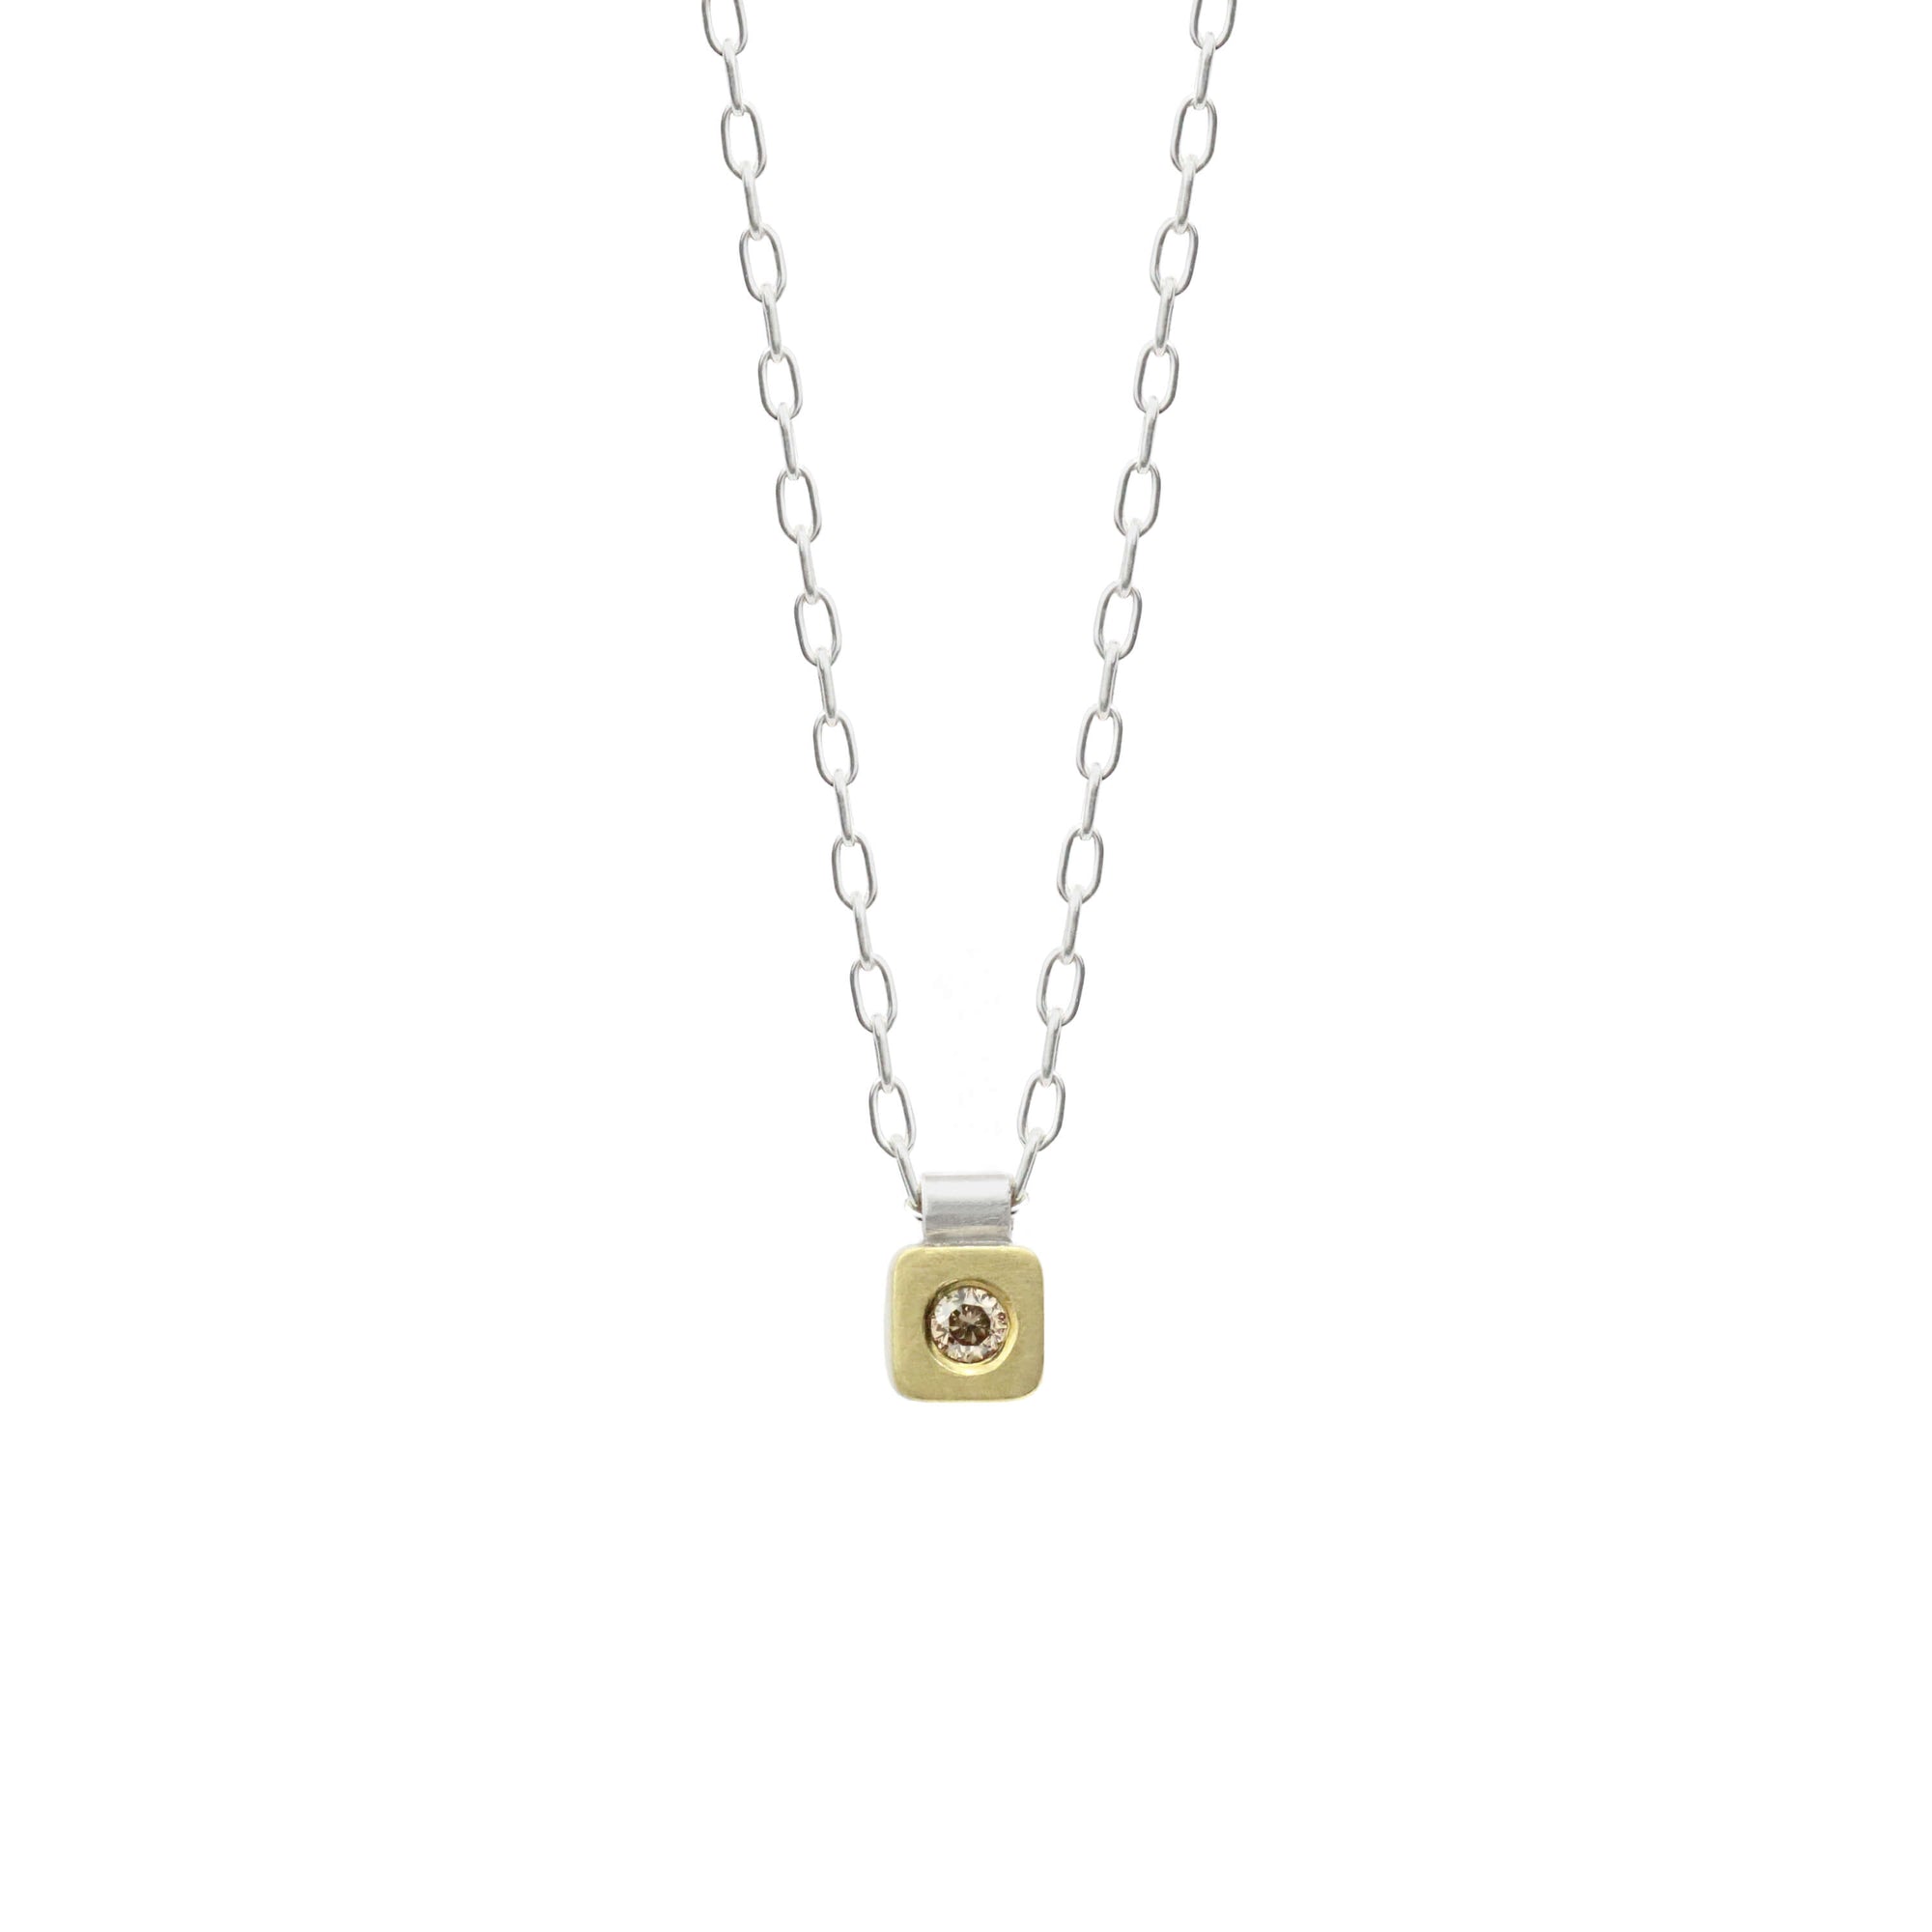 Yellow gold square cell pendant with champagne diamond. Handmade by EC Design Studio in Minneapolis, MN using recycled metal and conflict-free stone.